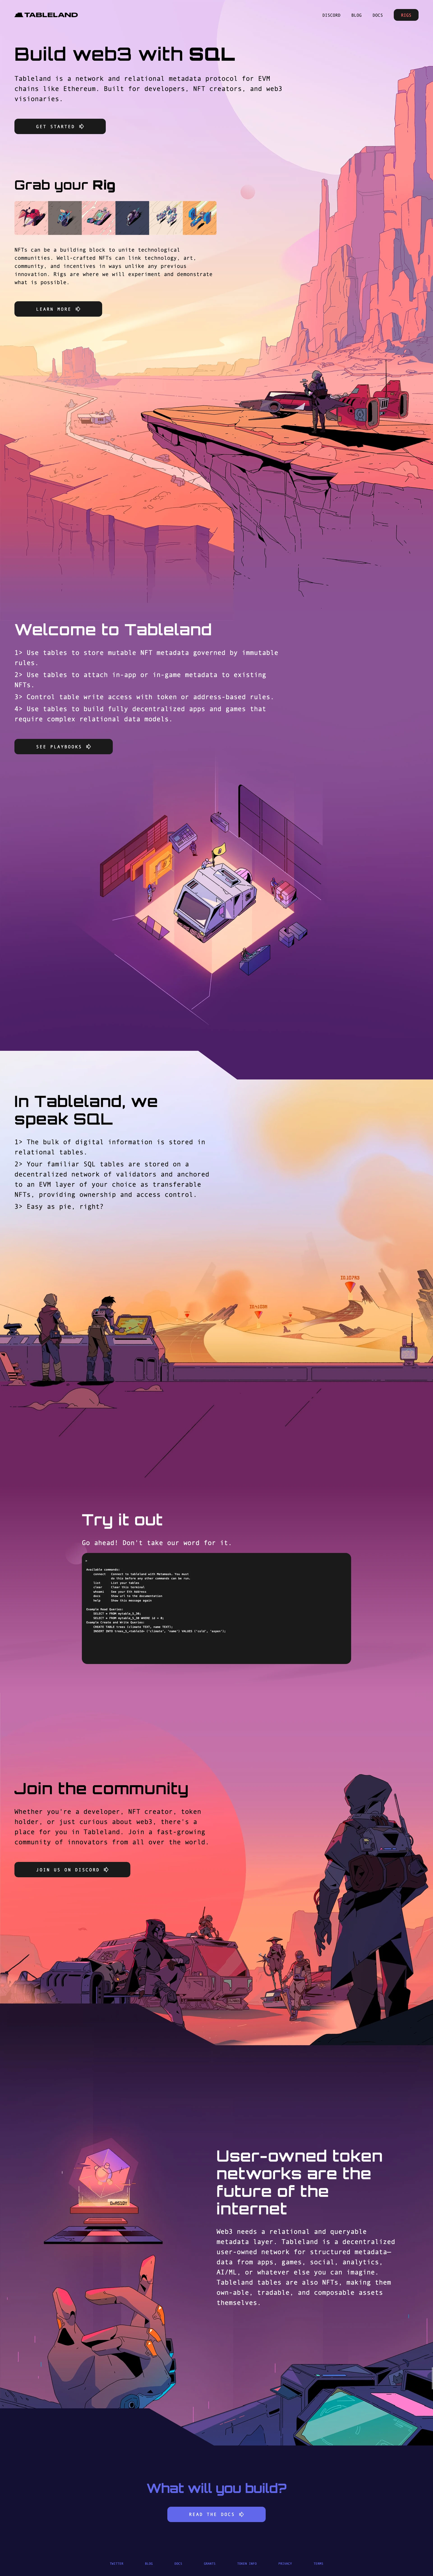 Tableland Landing Page Example: Build web3 with SQL. Tableland is a network and relational metadata protocol for EVM chains like Ethereum. Built for developers, NFT creators, and web3 visionaries.